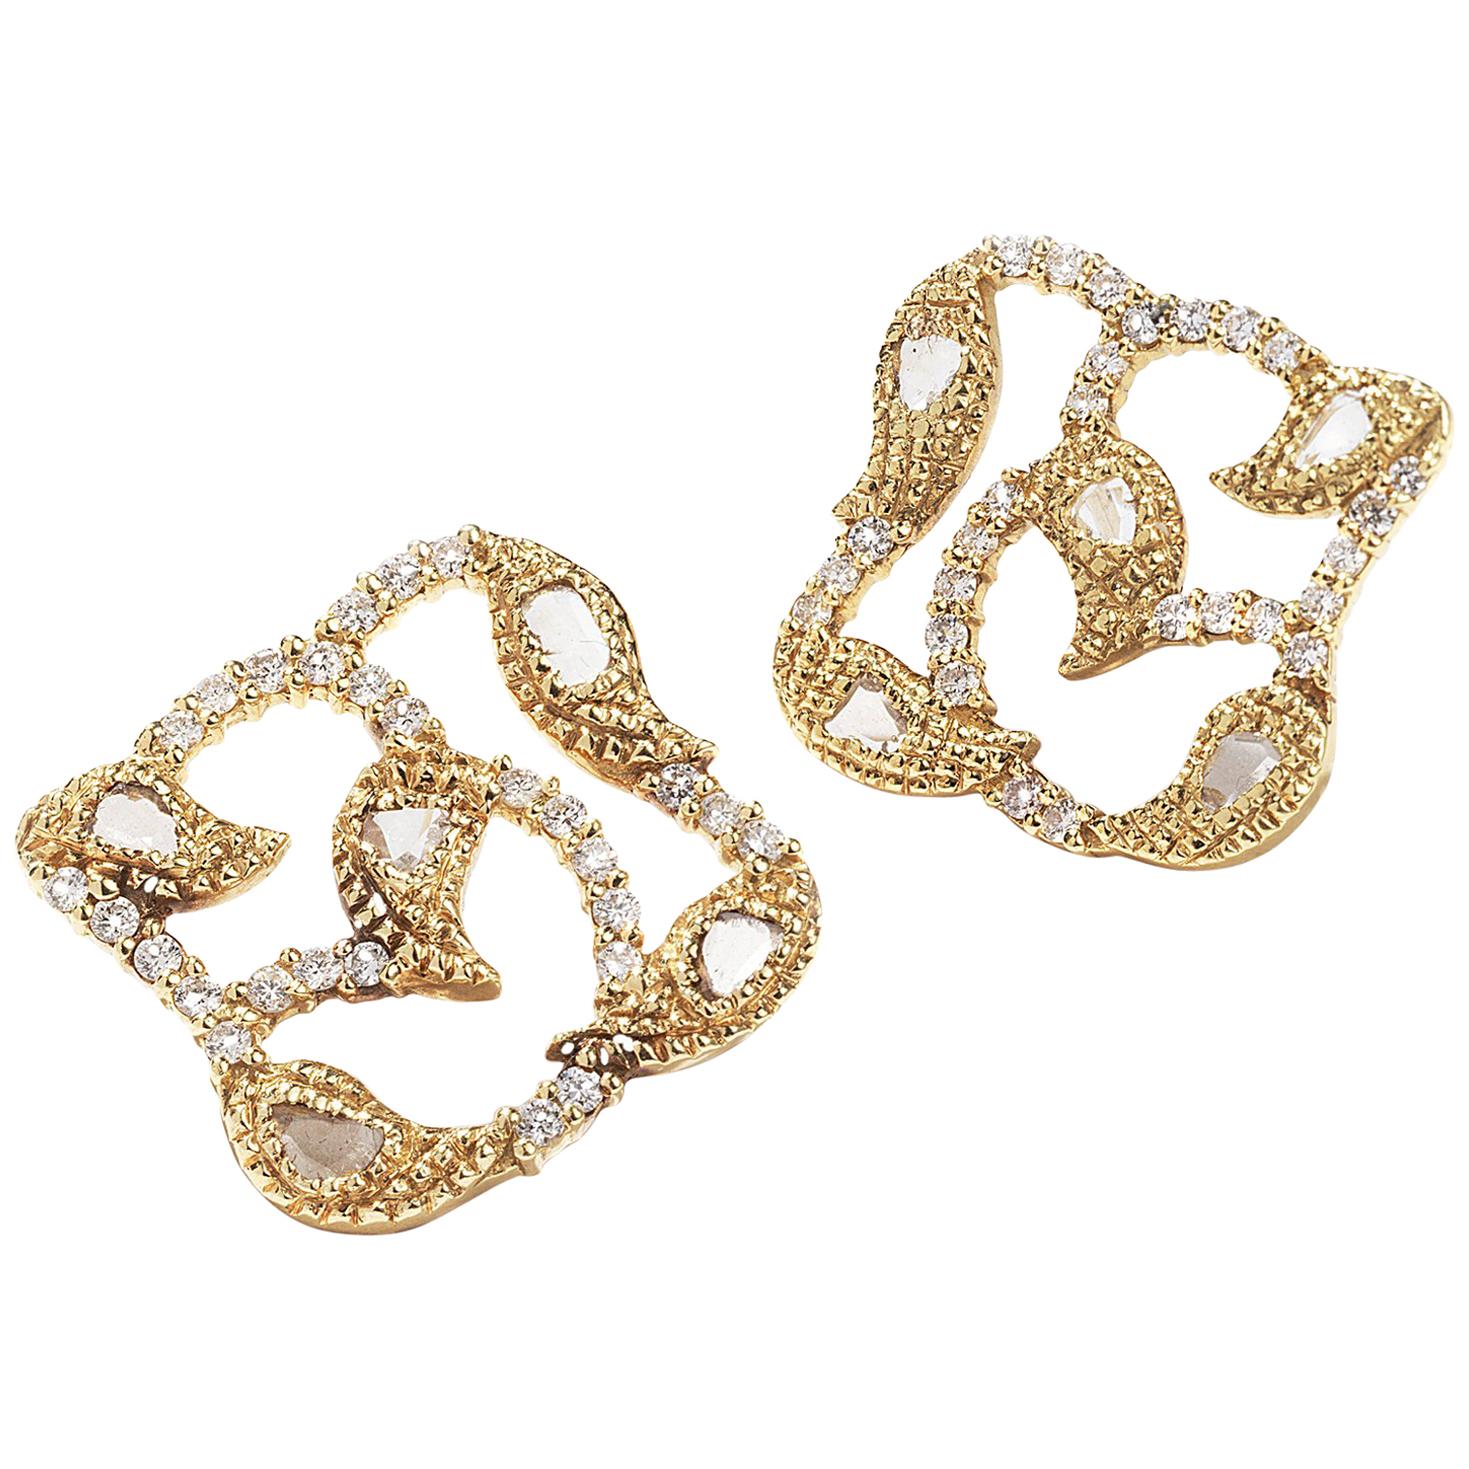 Coomi 20K Vine Post Earrings with Brilliant and Rose Cut Diamonds